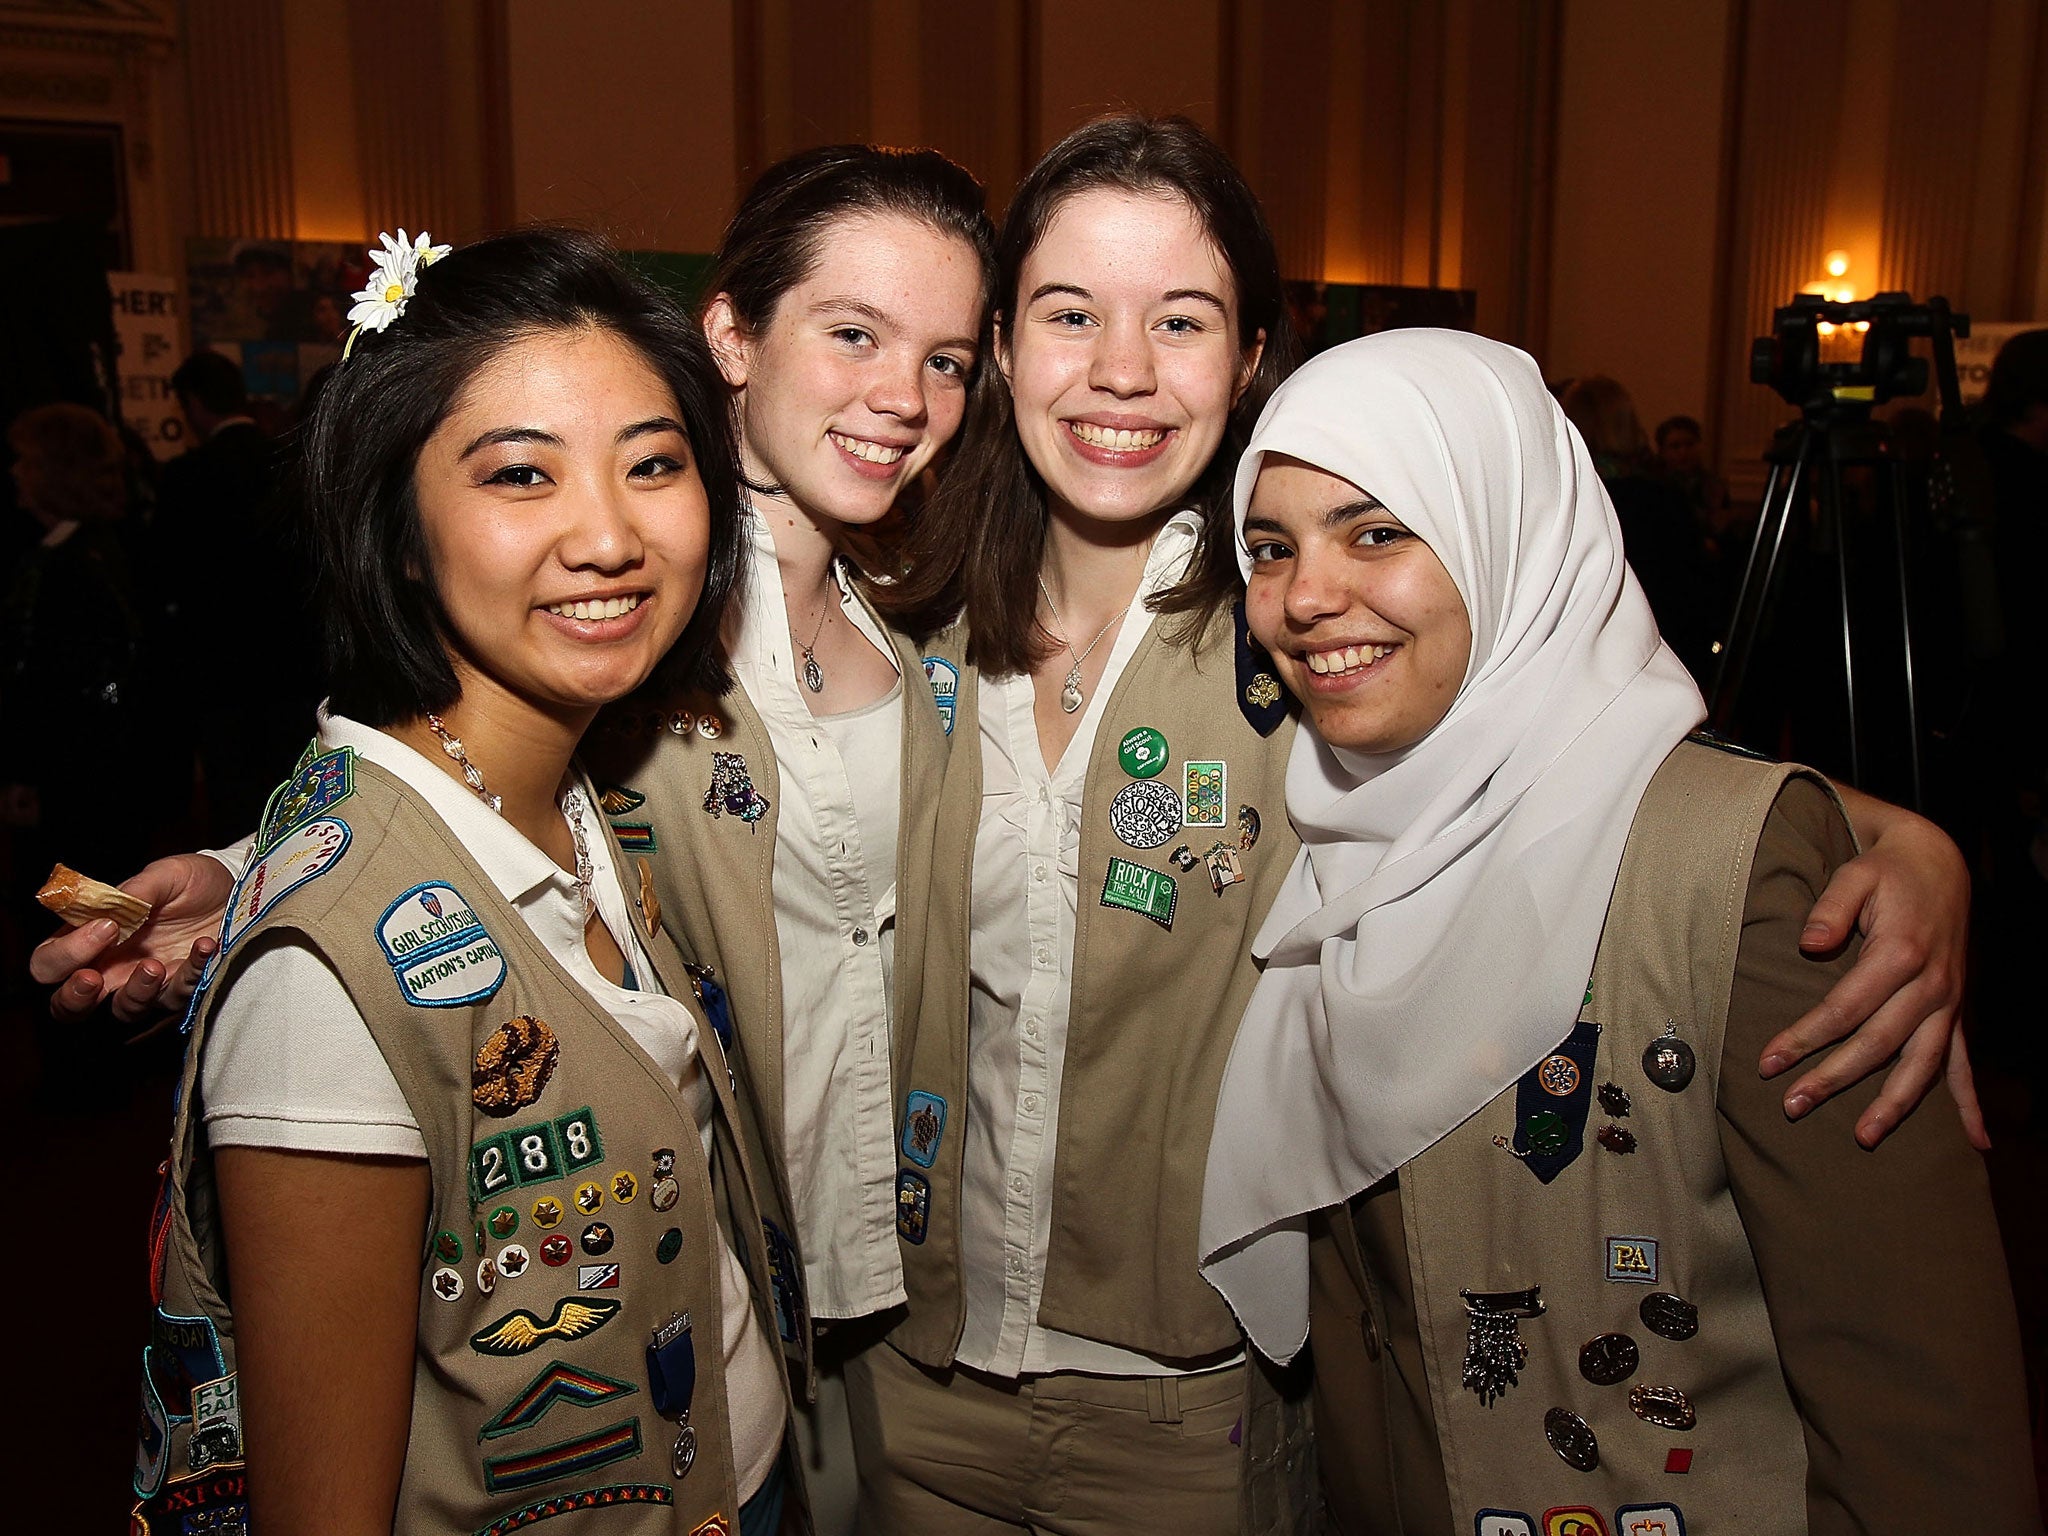 Area Girl Scouts attend Girl Scouts At 100: The Launch of ToGetHerThere at Capitol Hill Cannon House Office Bldg, Caucus Room on February 1, 2012 in Washington, DC.